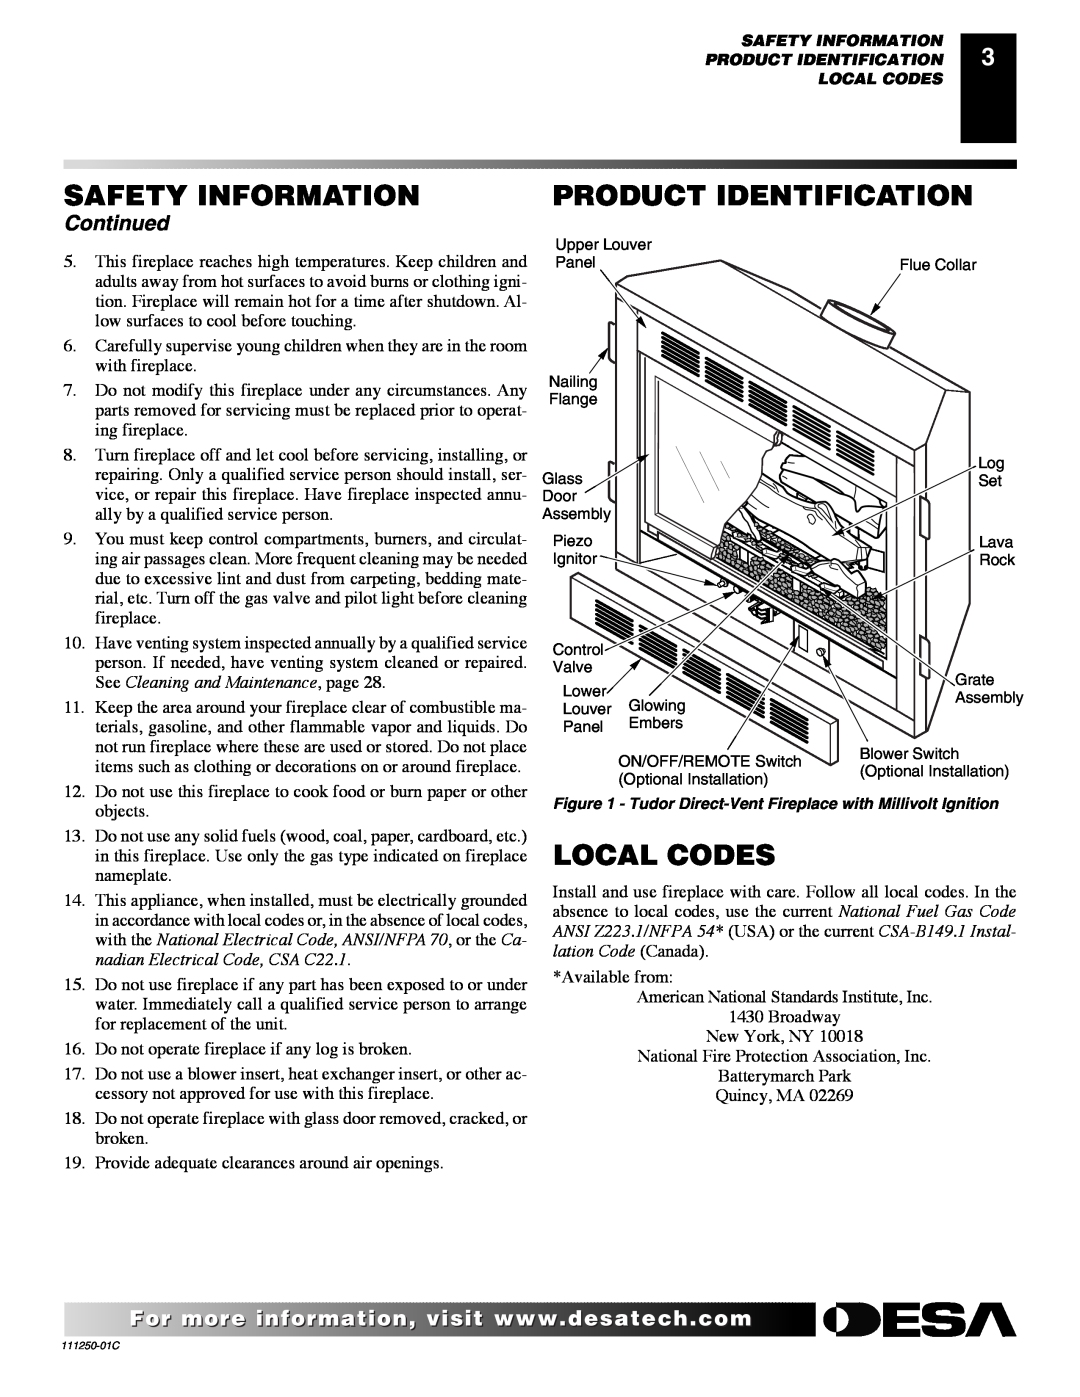 Desa (V)T36NA SERIES Product Identification, Local Codes, Continued, Safety Information, nadian Electrical Code, CSA C22.1 